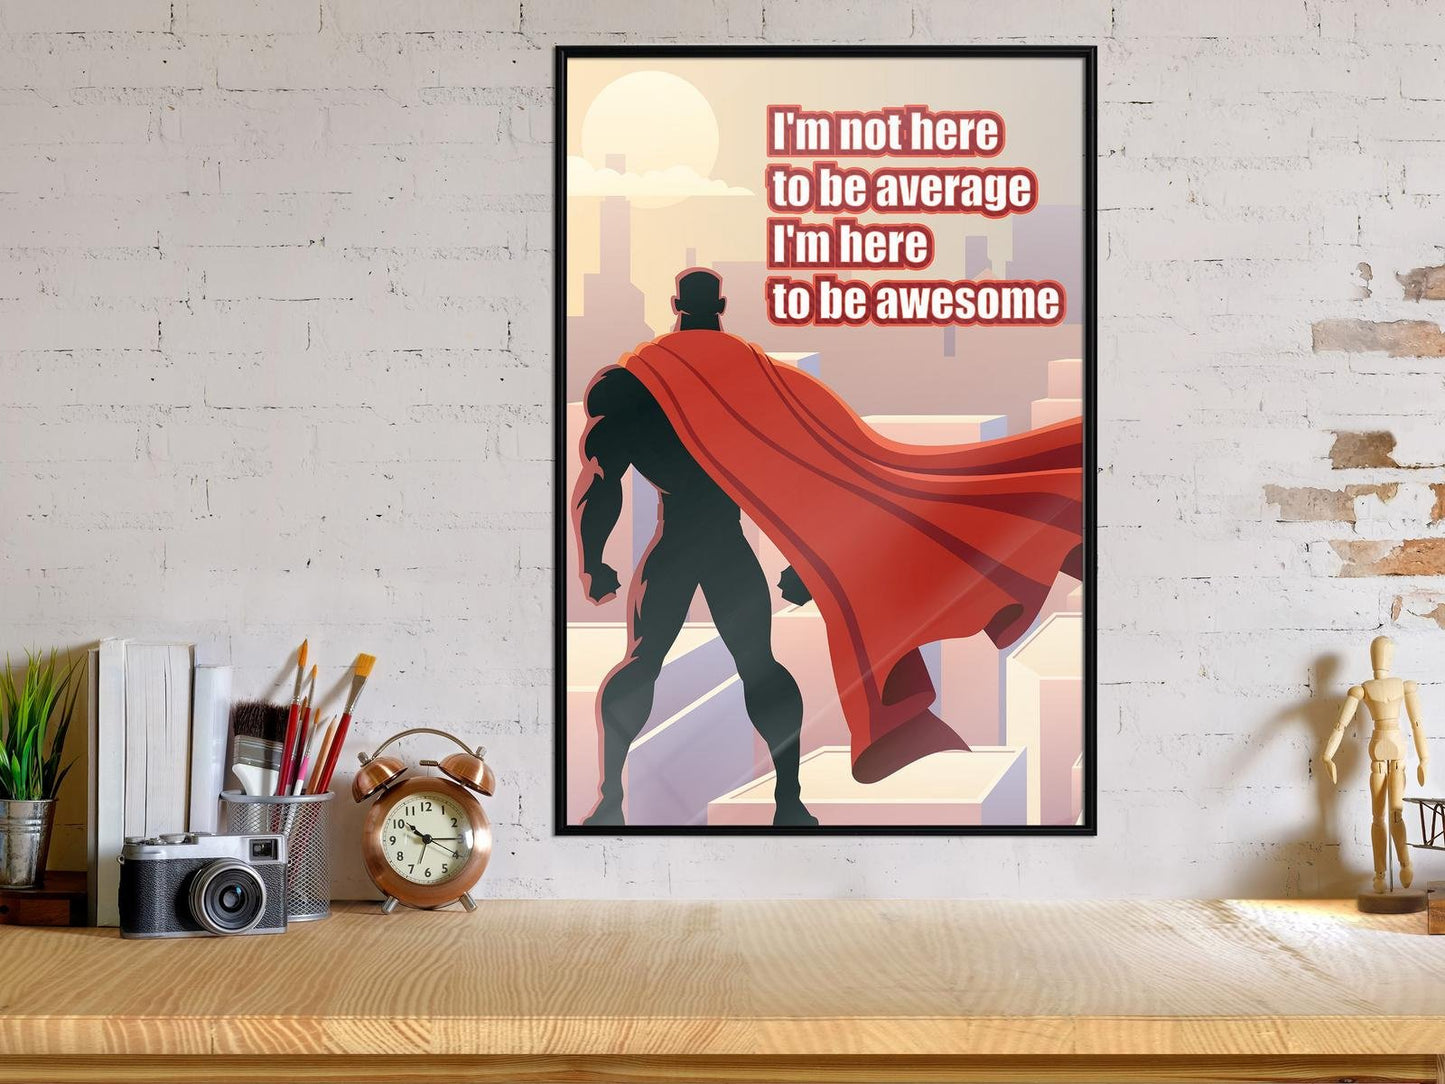 Be Your Own Superhero